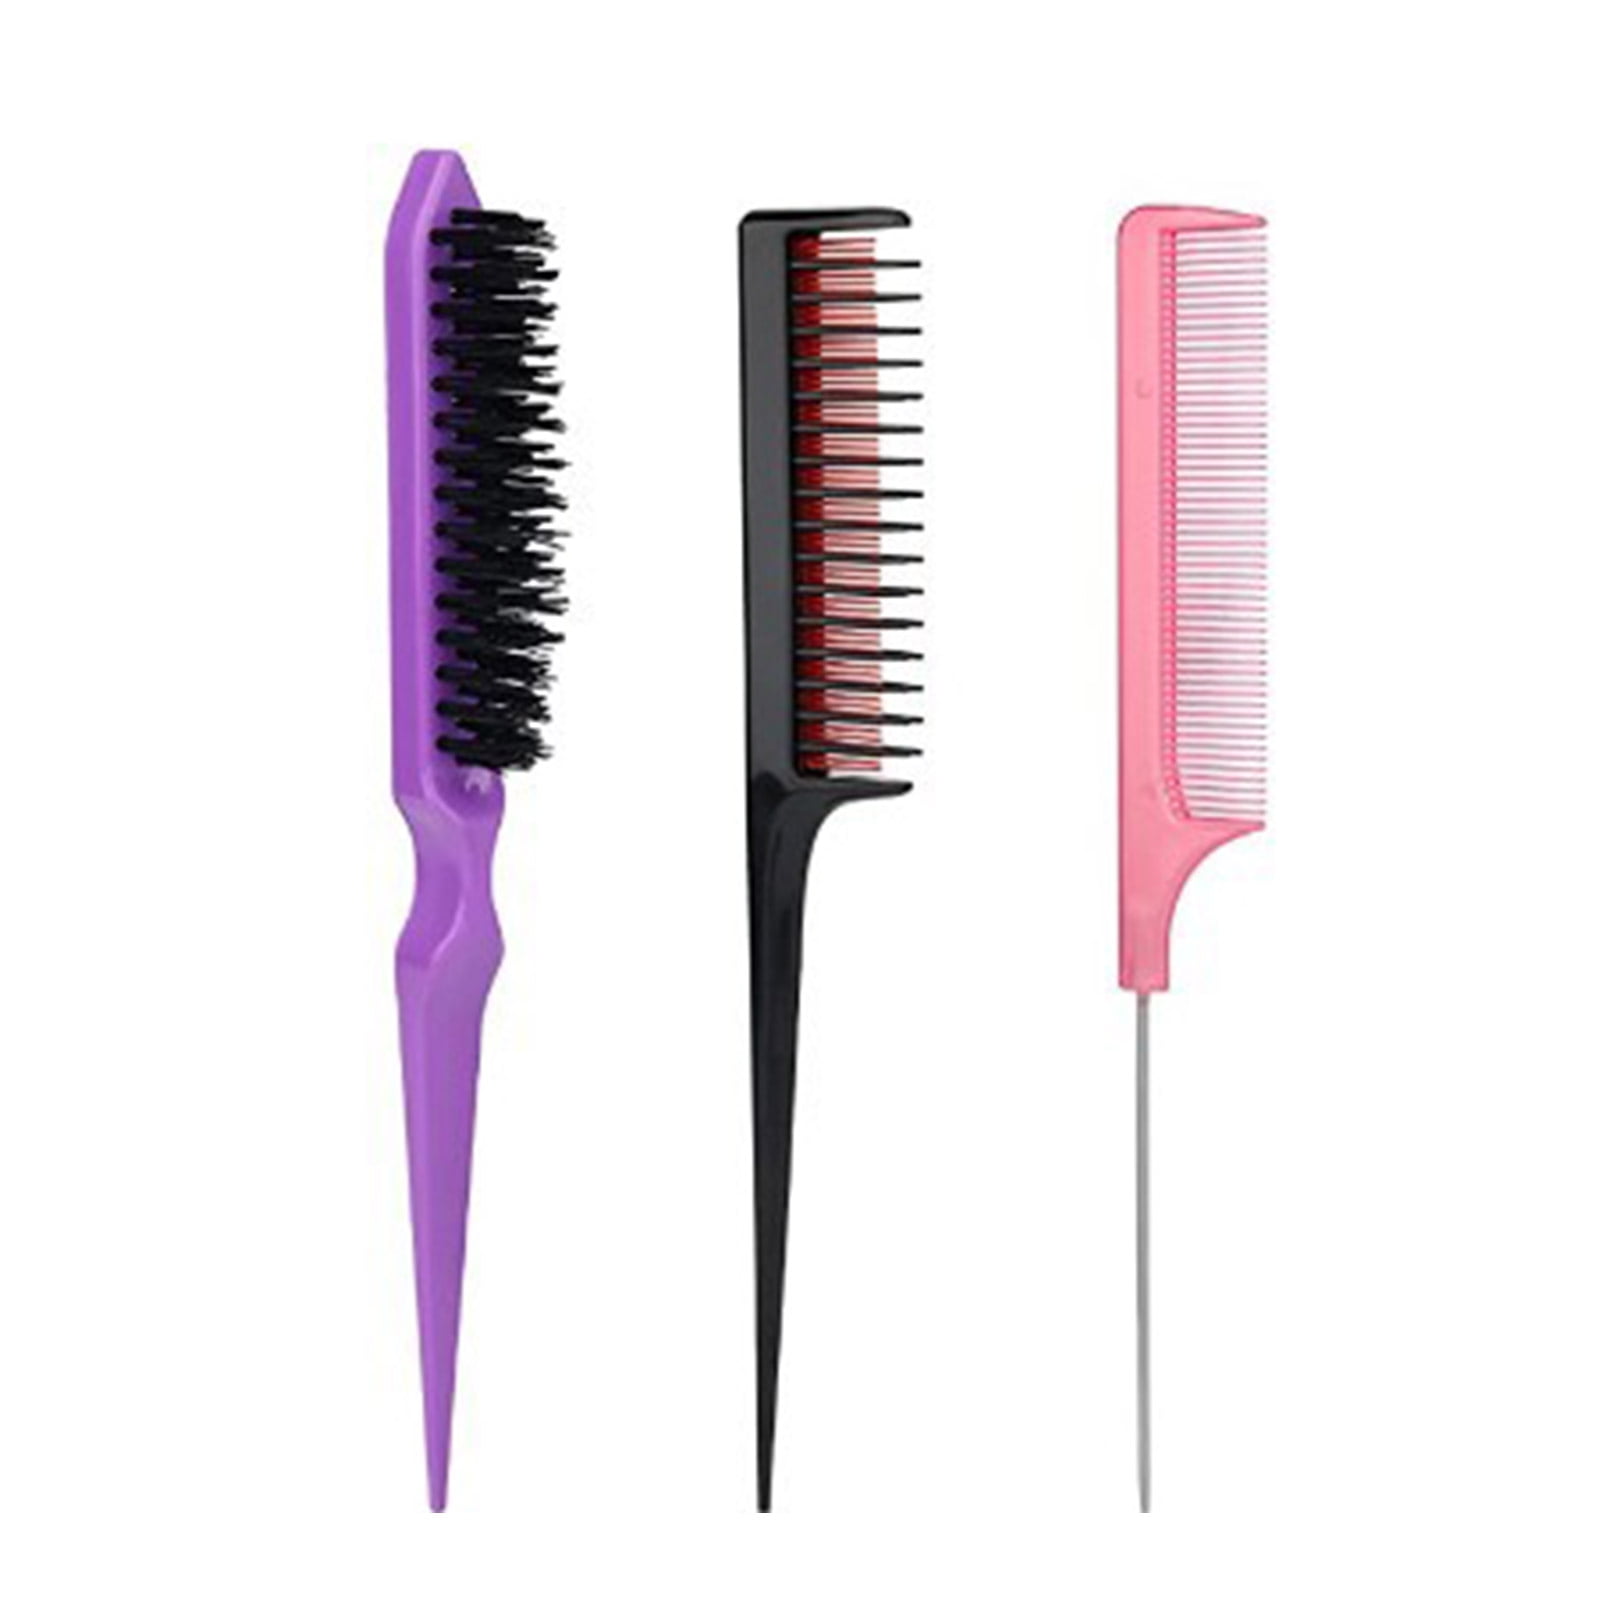 AOOOWER 3 Pieces Women Hair Styling Combs Long Hair Comb Brush Anti-Static  Ideal for Women Men Back Combing Hair Style Design 